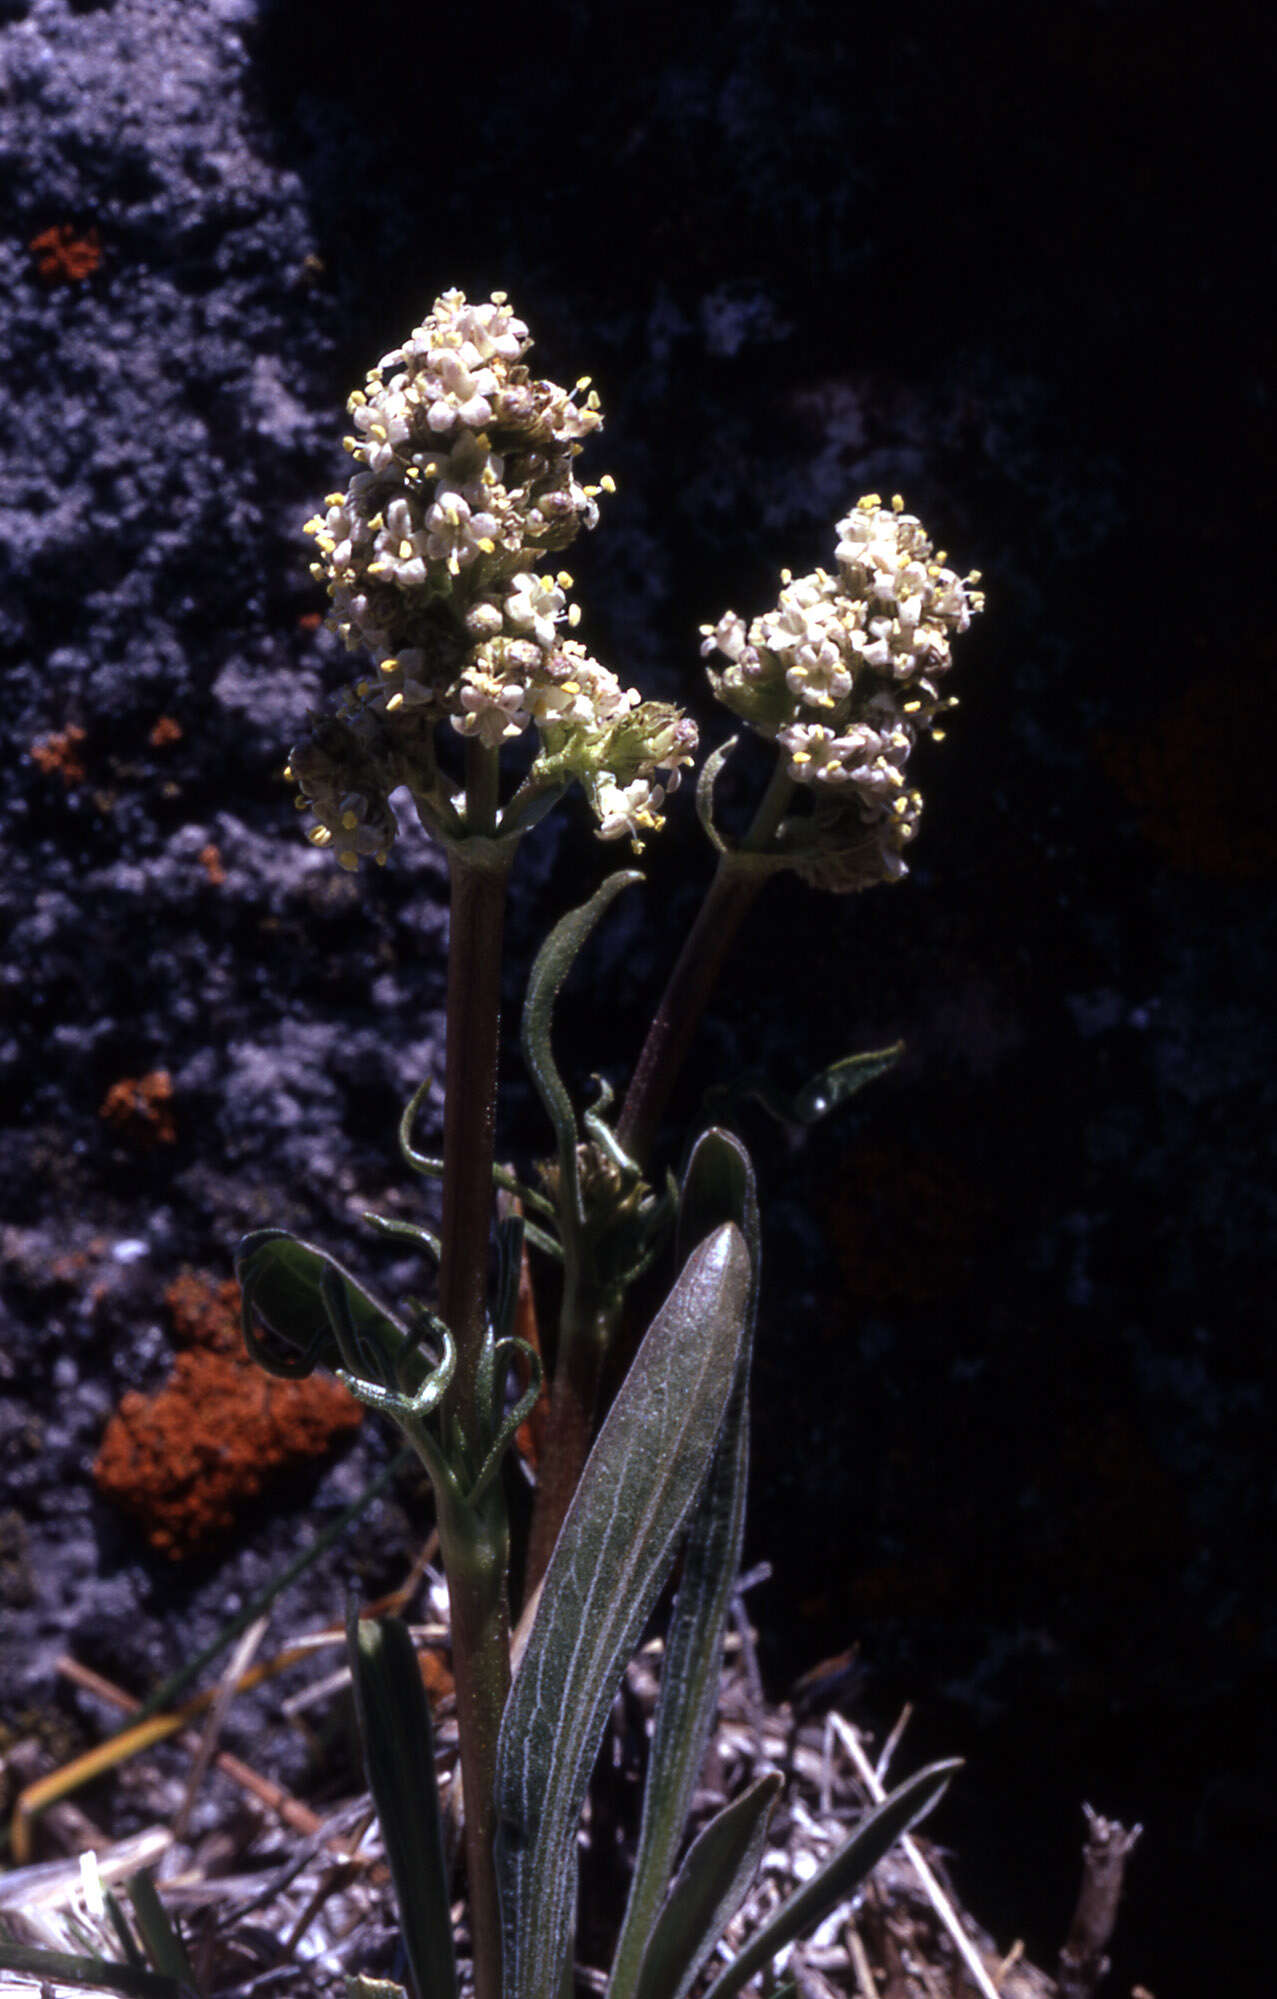 Image of tobacco root